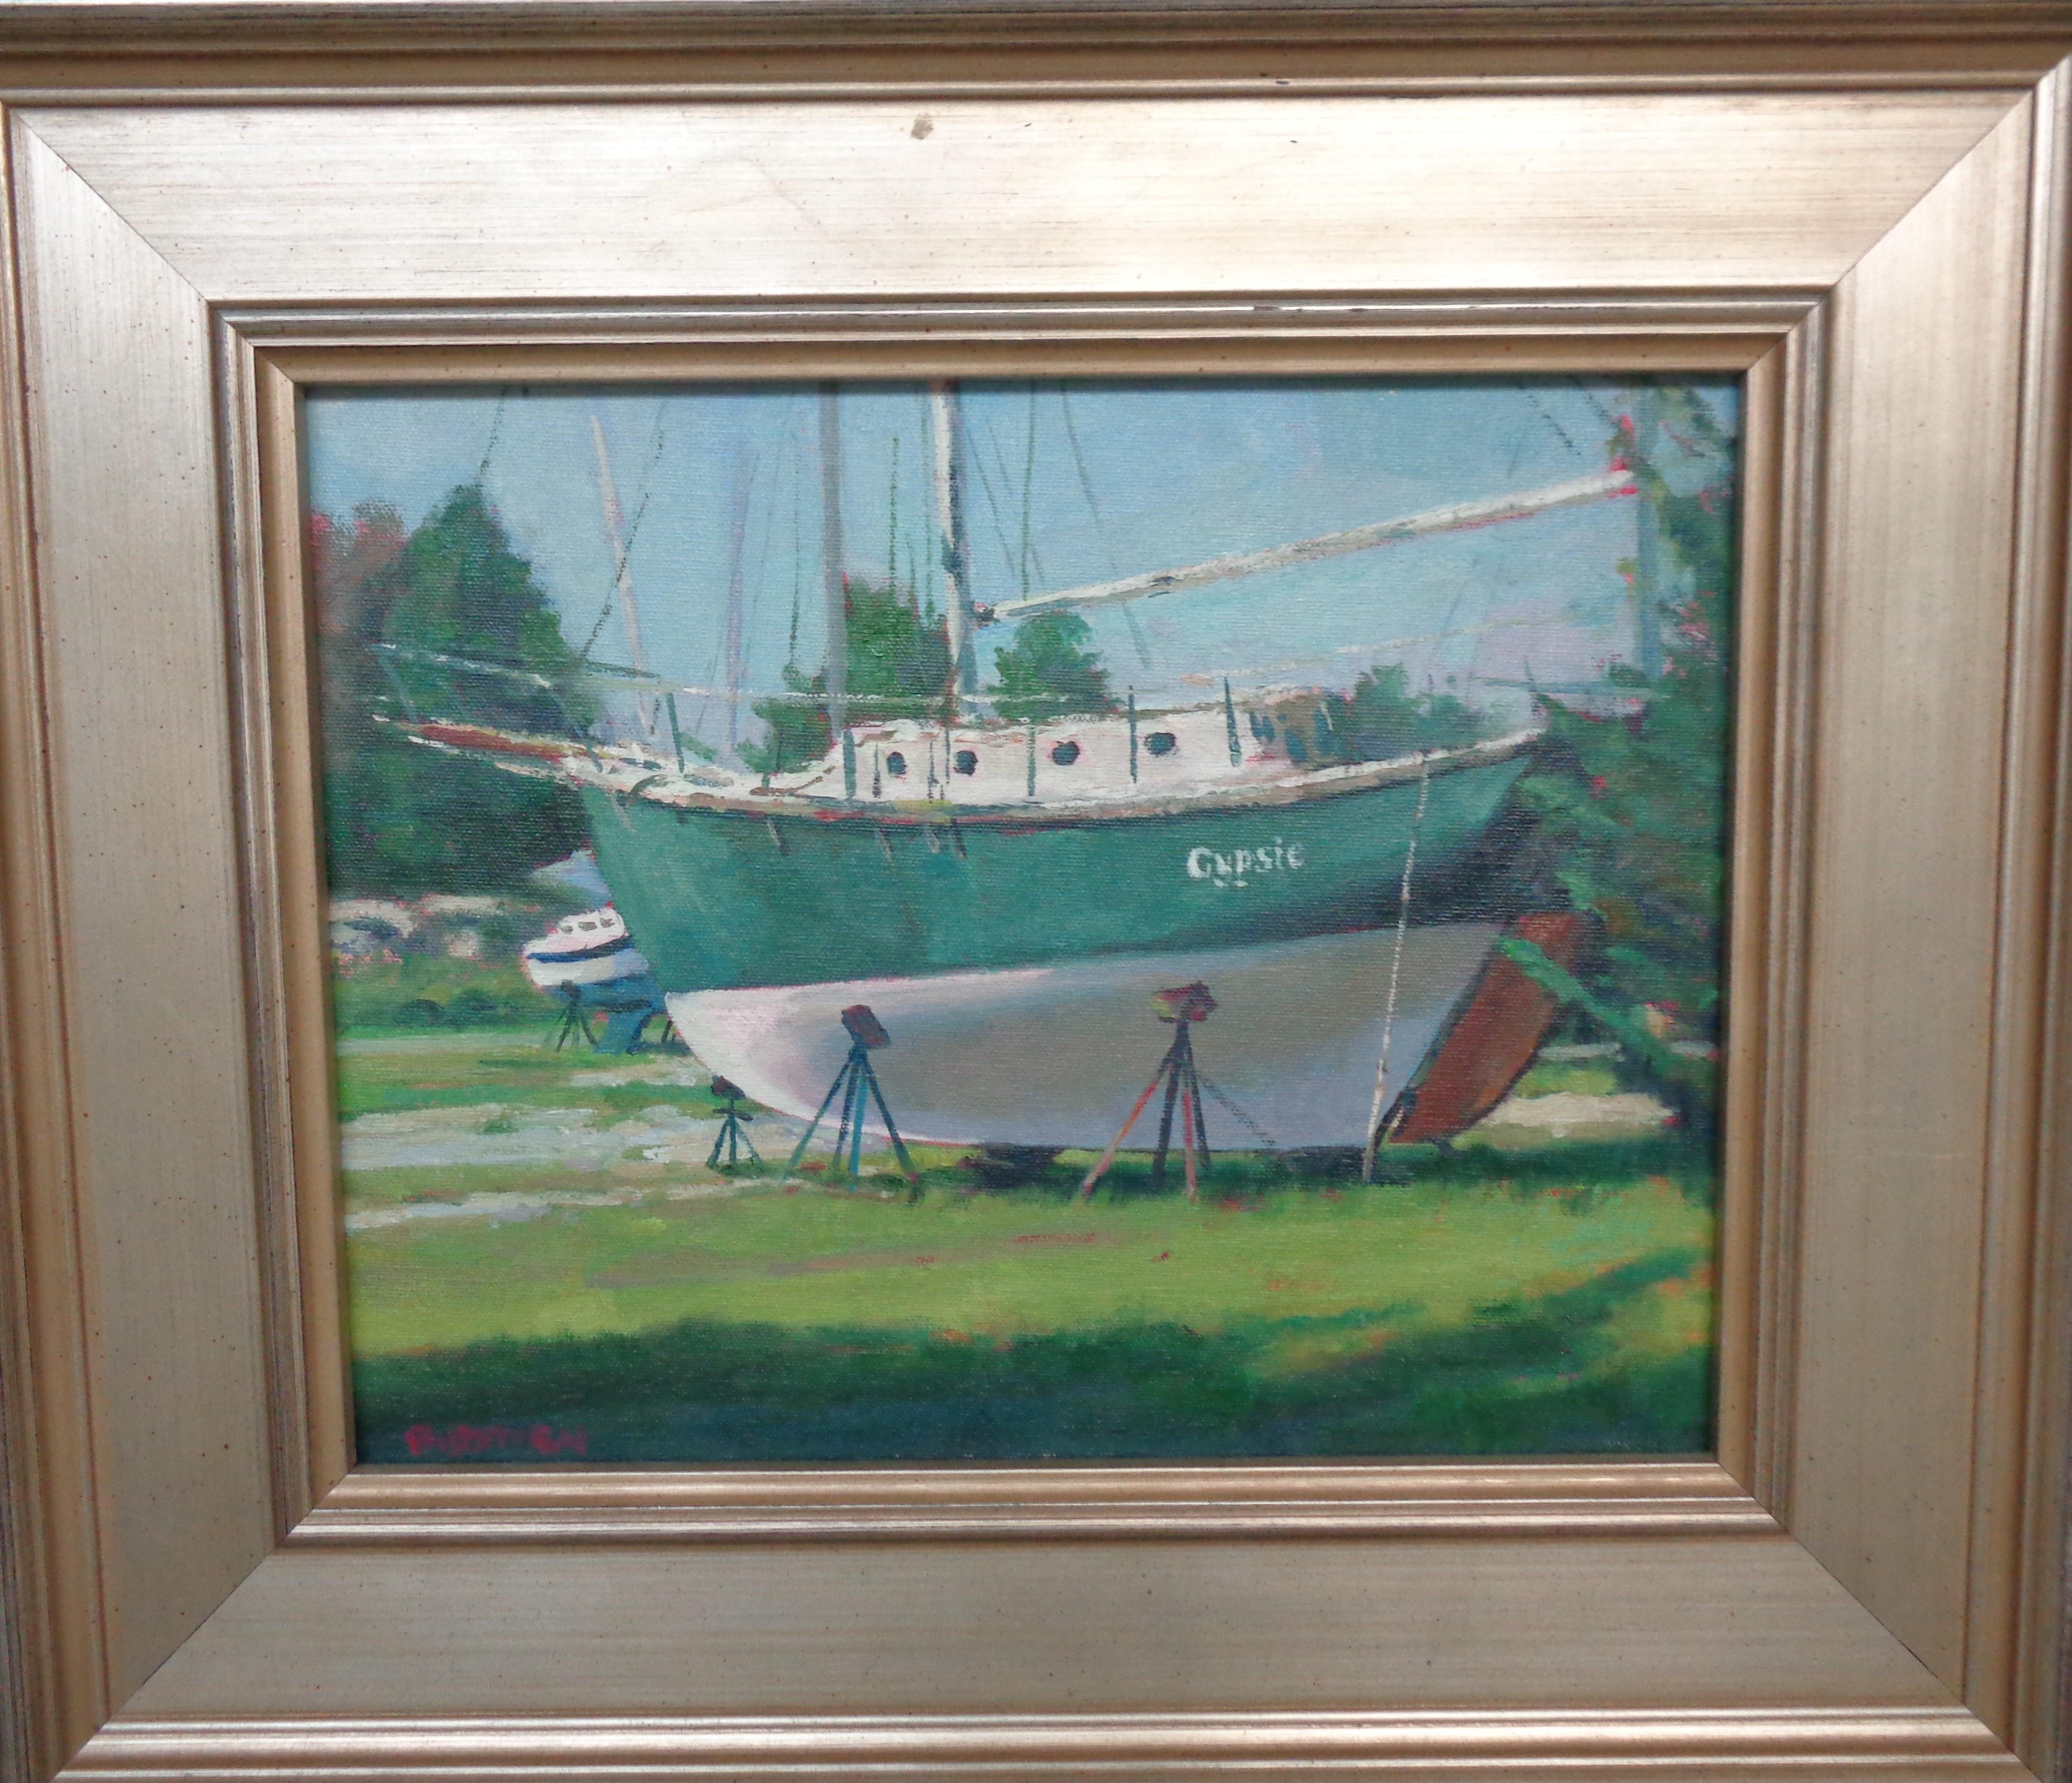 Gypsie is an oil painting on canvas by award winning contemporary artist Michael Budden that showcases a beautiful boat named Gypsie from the shore, This painting won First Place in the 2017 Cumberland County Plein Air Paint Out Competition. This